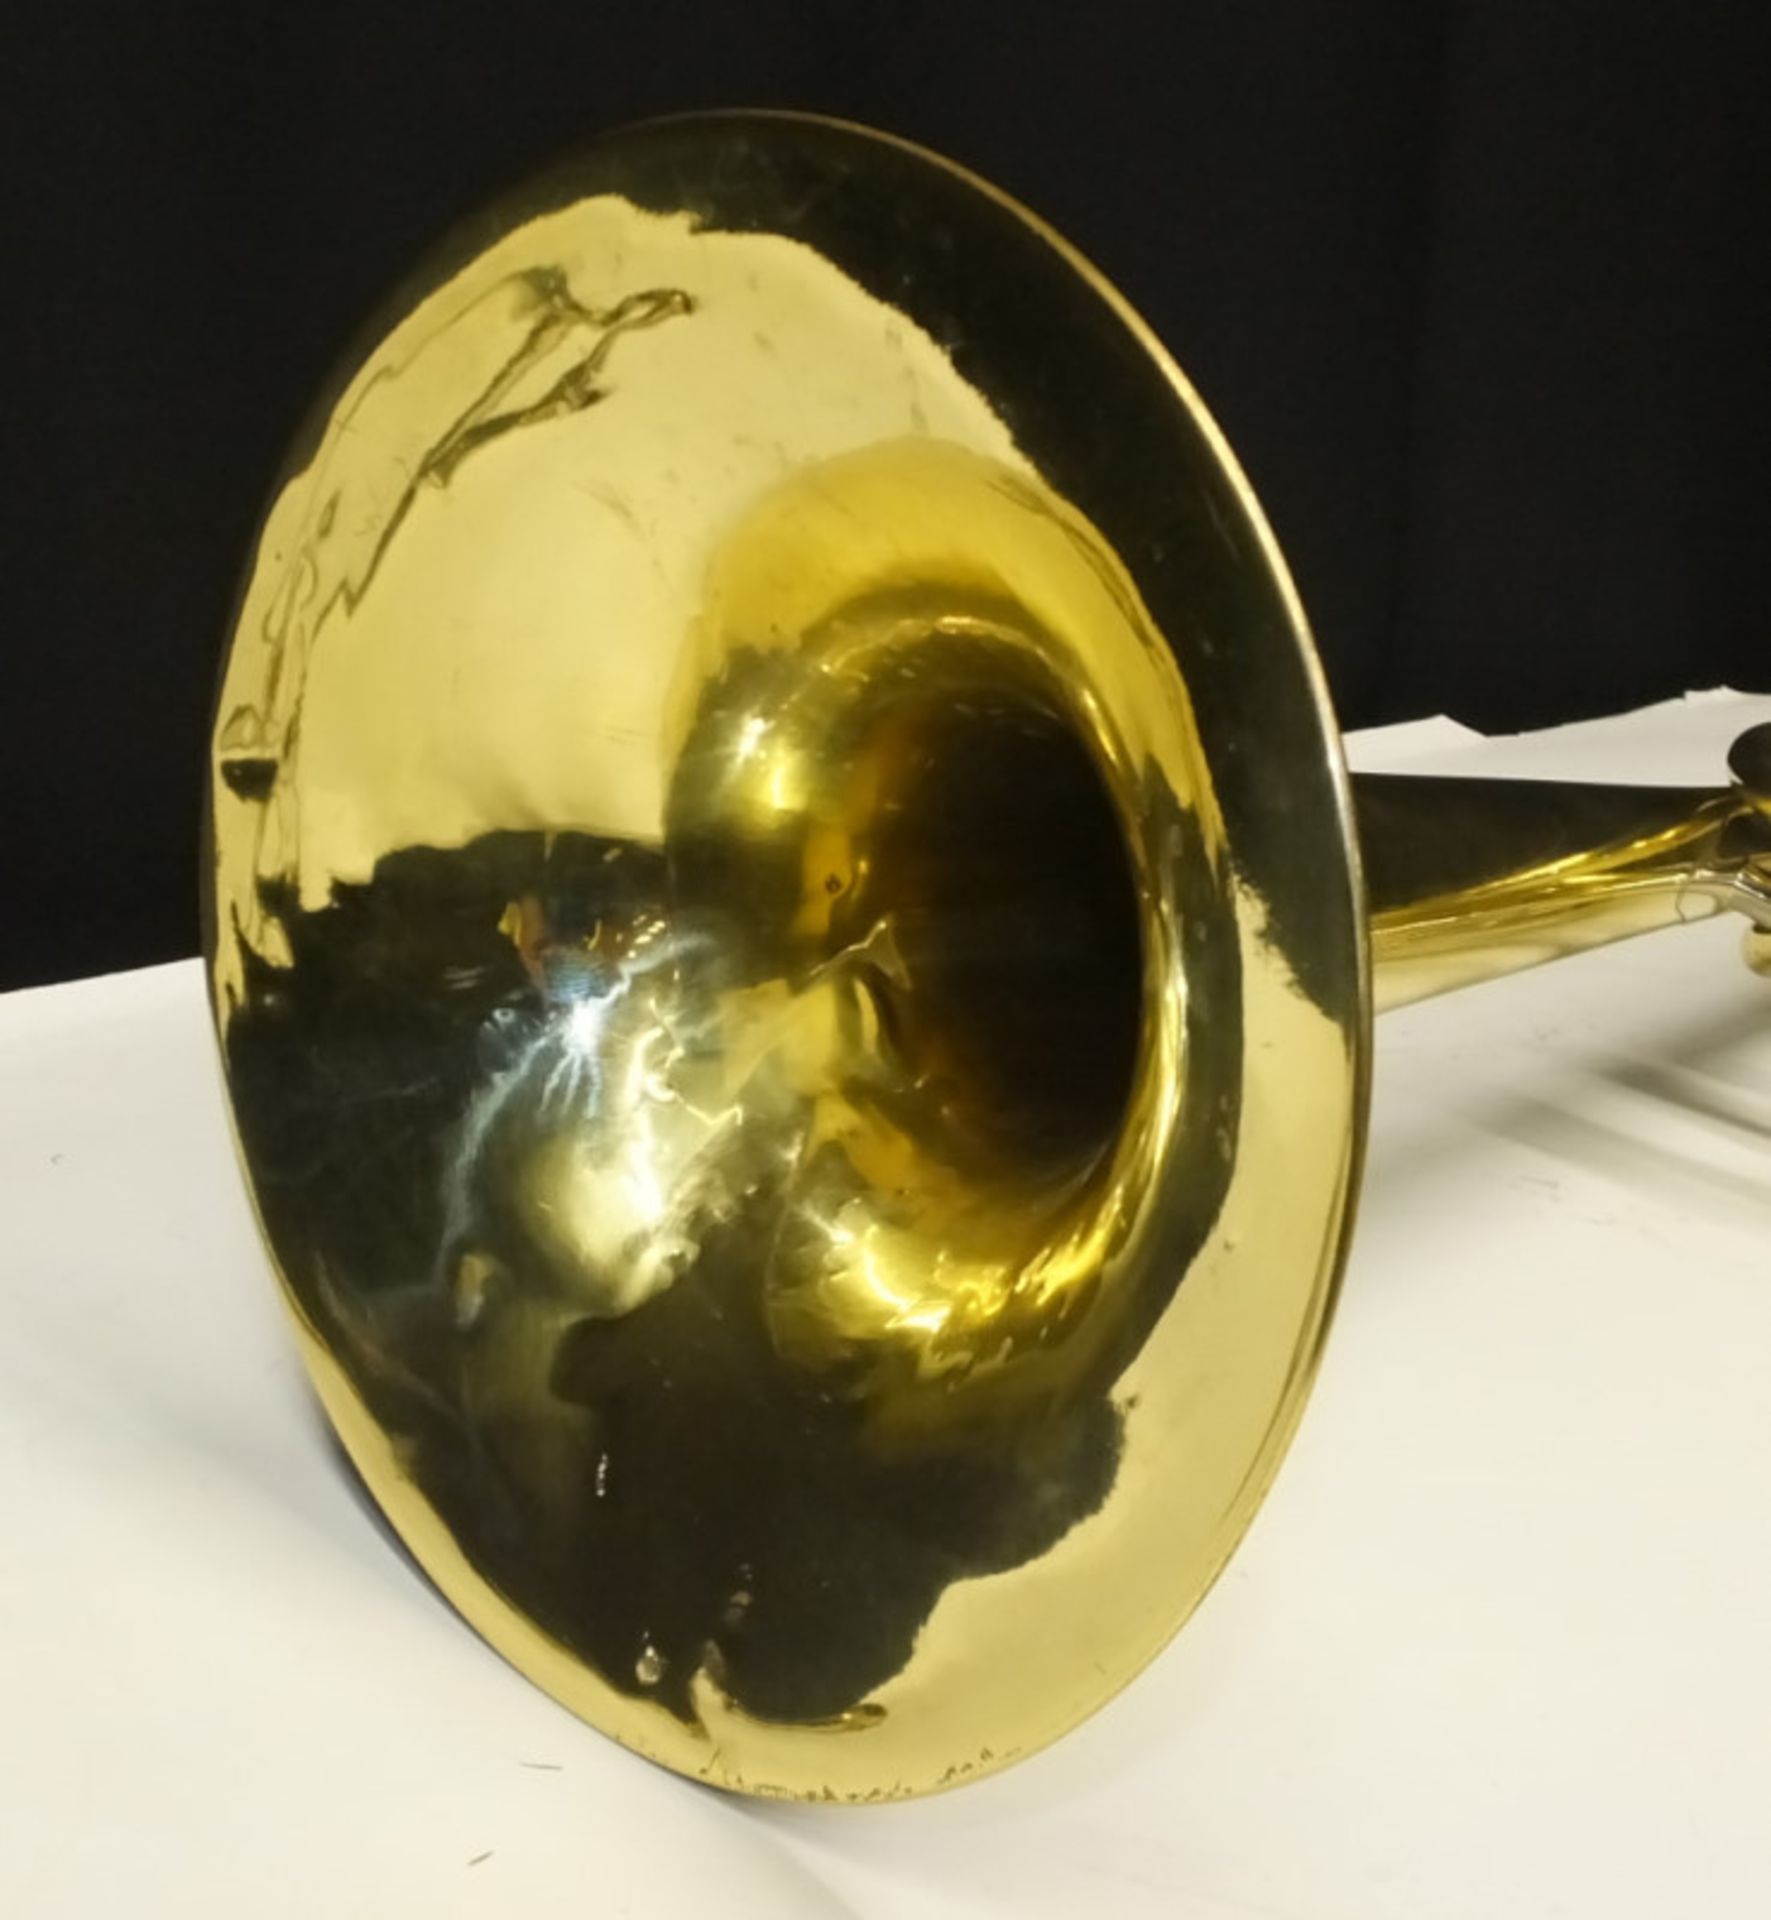 Rath R9 Trombone in Protec case - Serial No. R9 012 - Please check photos carefully for - Image 7 of 22